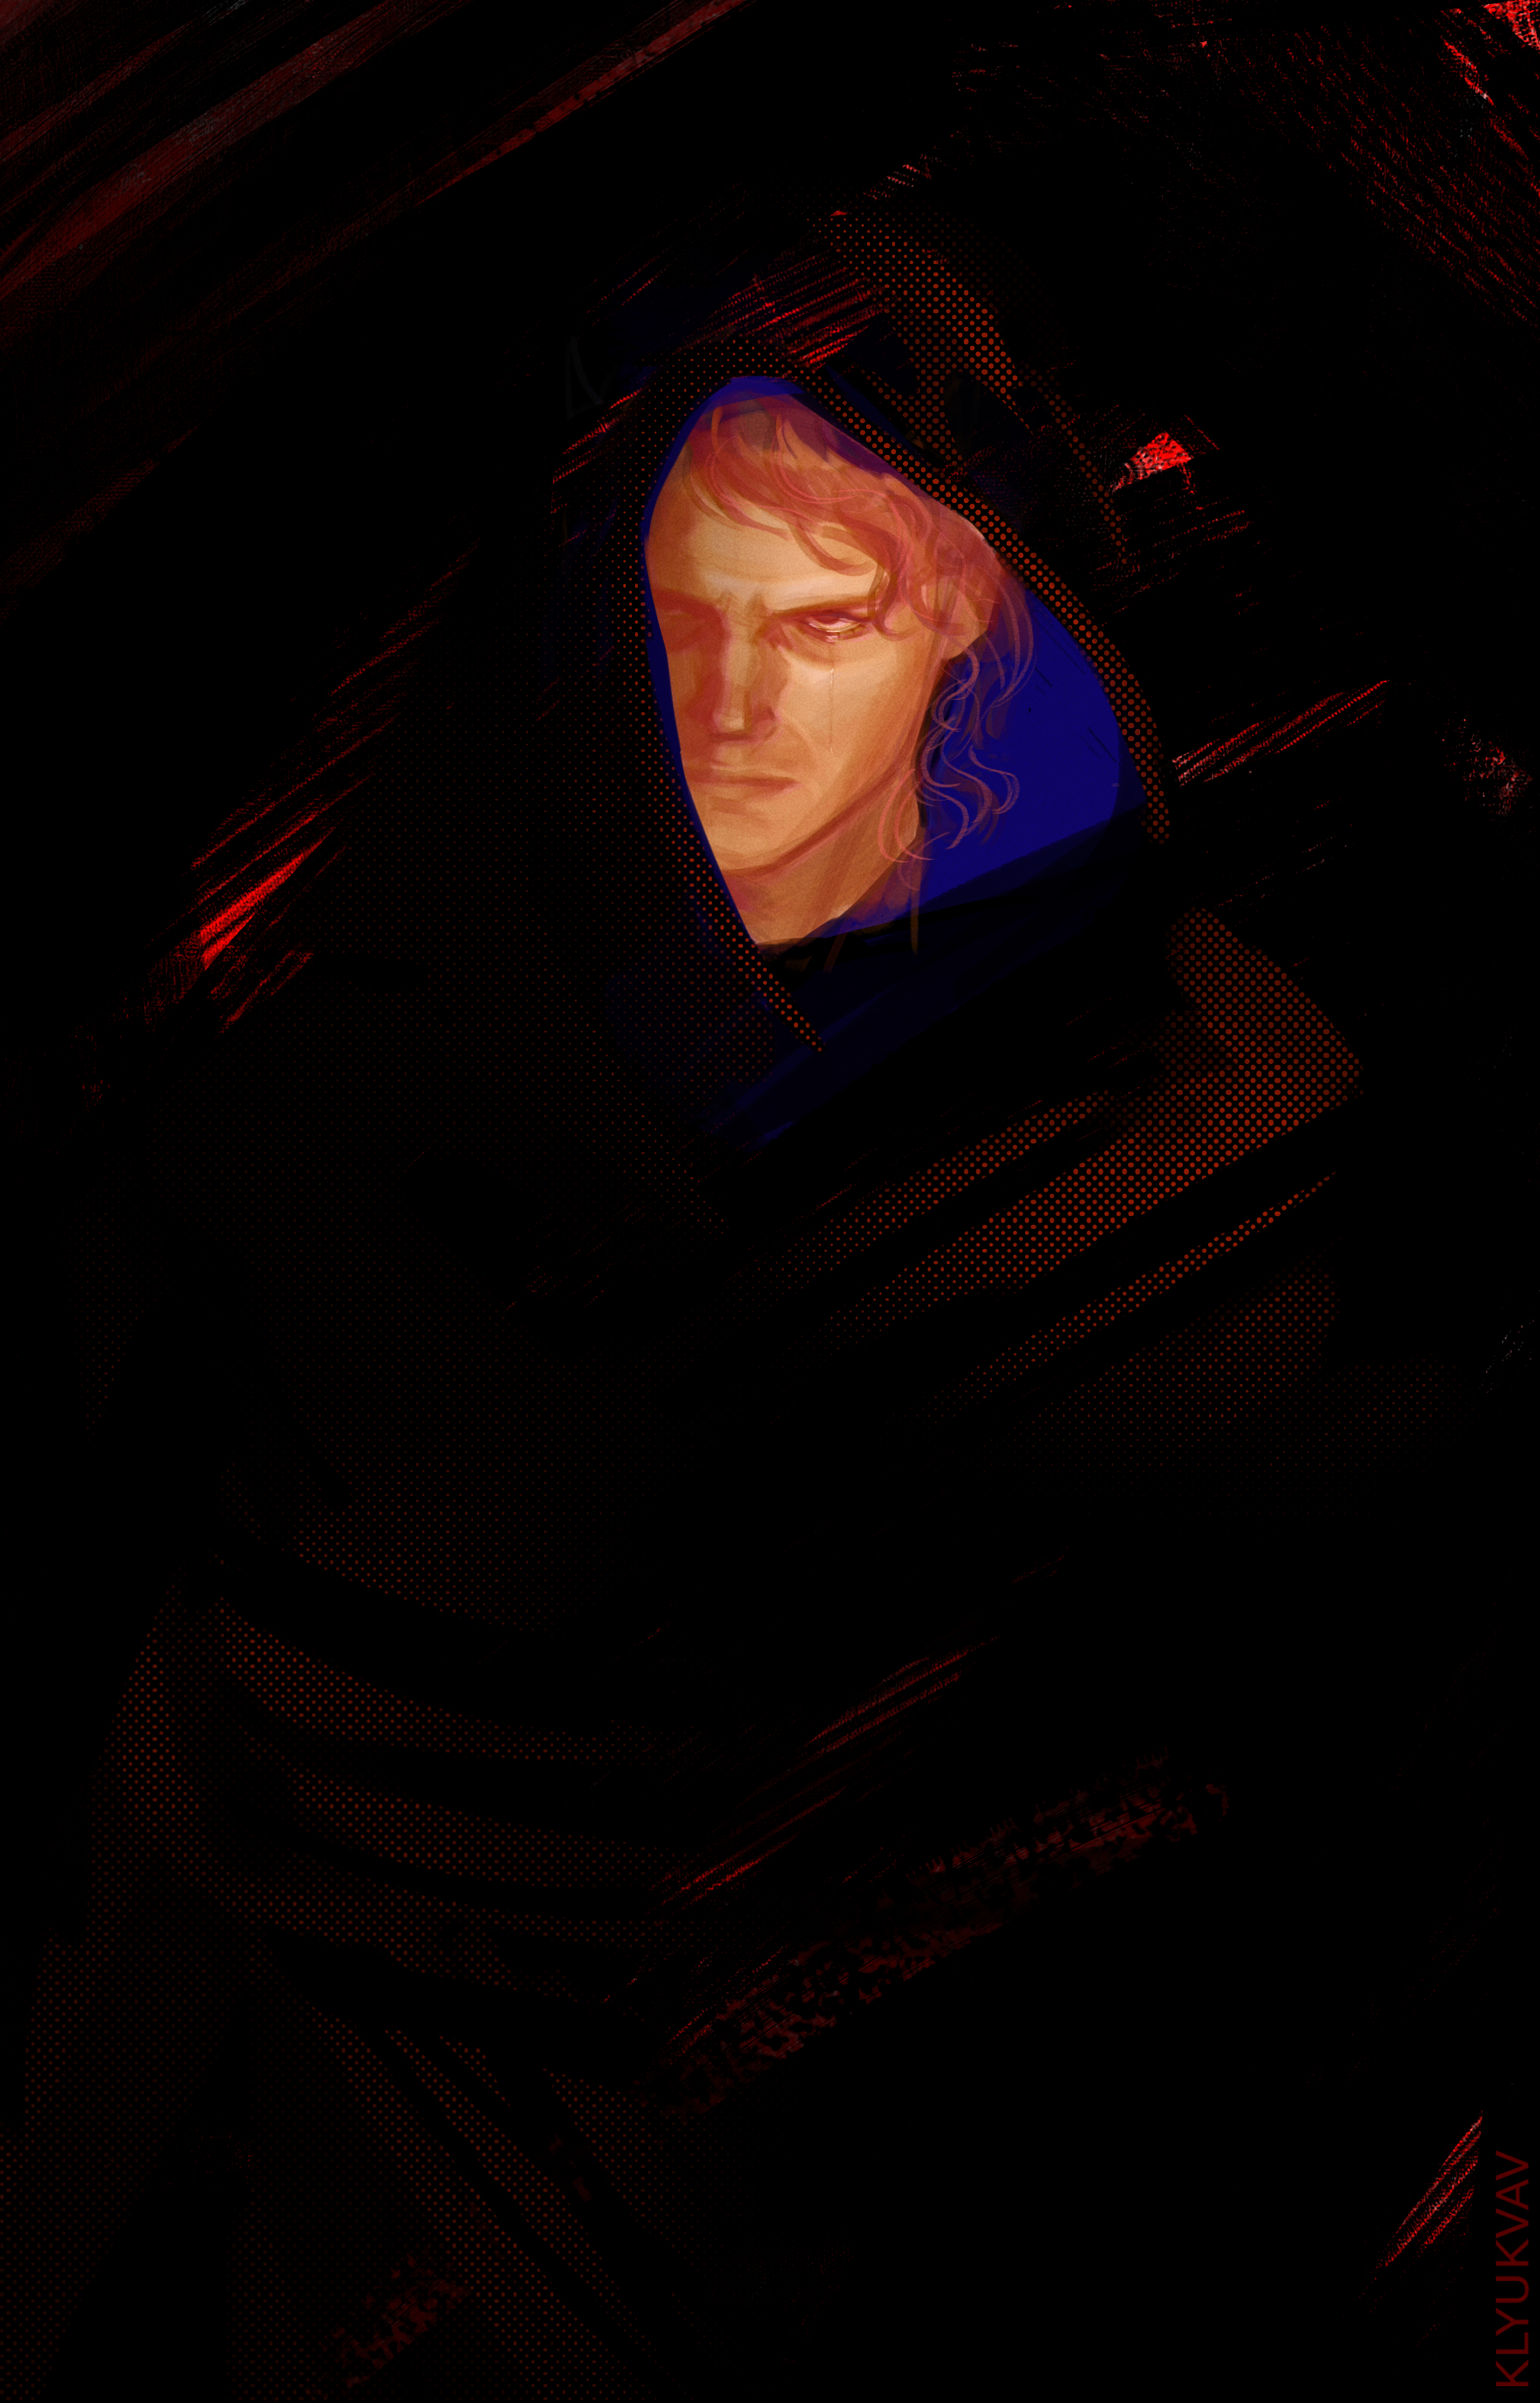 General 2018x3148 Star Wars Star Wars: Episode III - The Revenge of the Sith Anakin Skywalker Sith movies hate sad sadness crying portrait display digital art watermarked